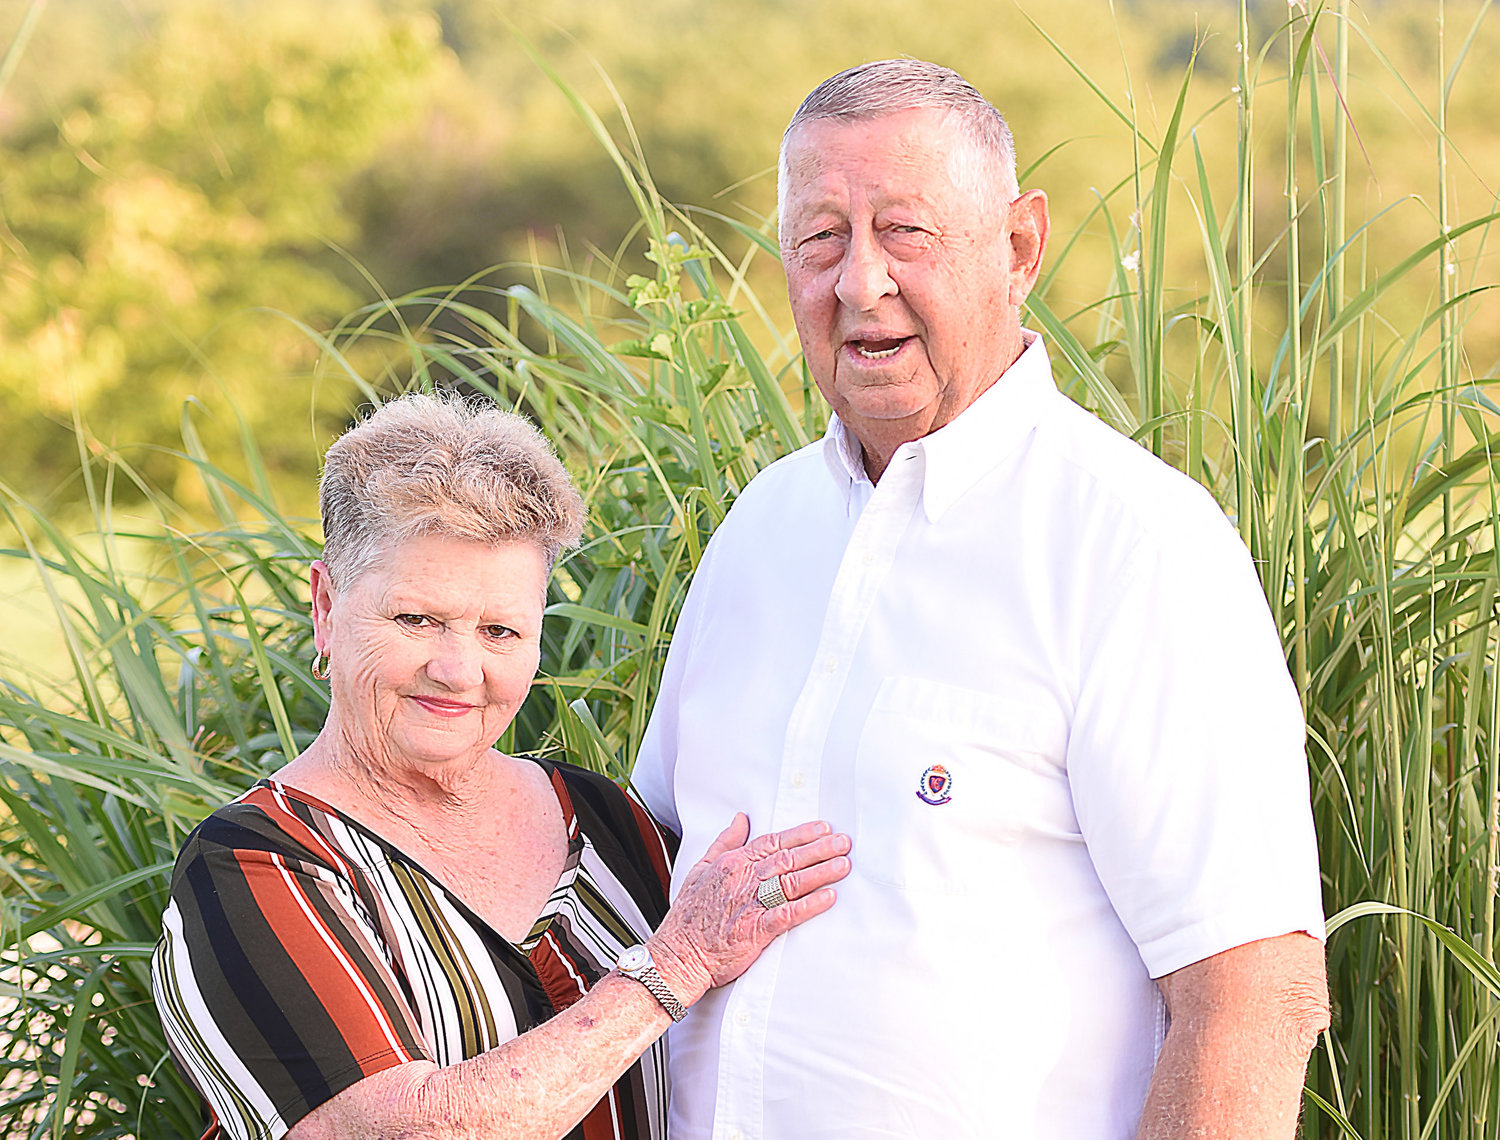 Wagoners celebrate 50 years of marriage